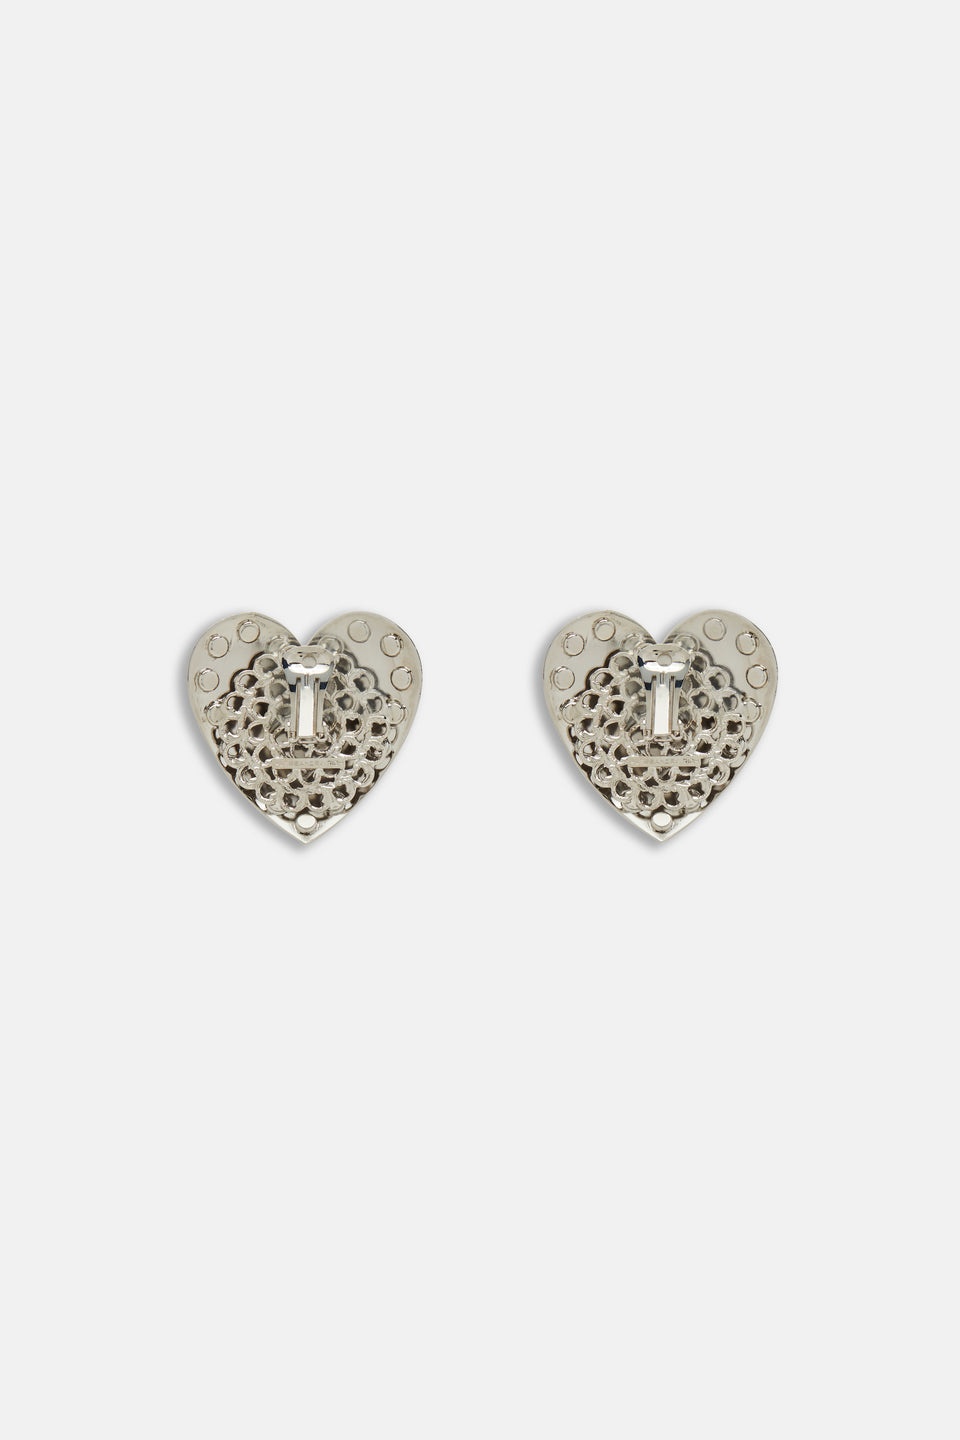 METAL HEART EARRINGS WITH CRYSTALS - 2